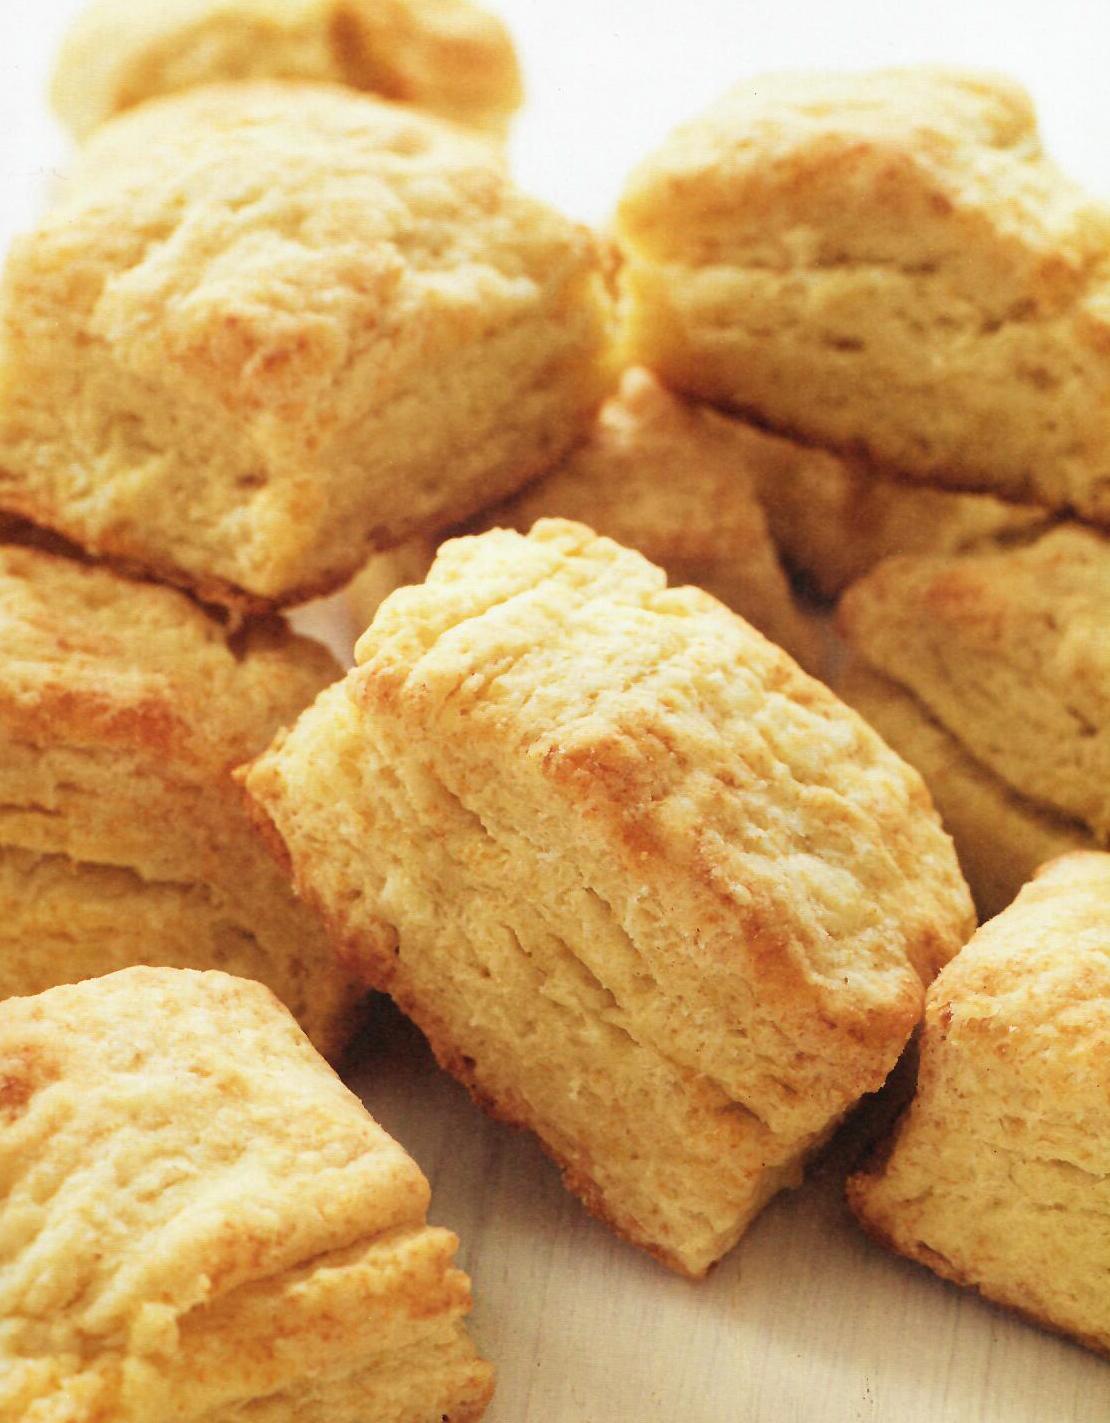  These biscuits are made with love and perfect for sharing with family and friends